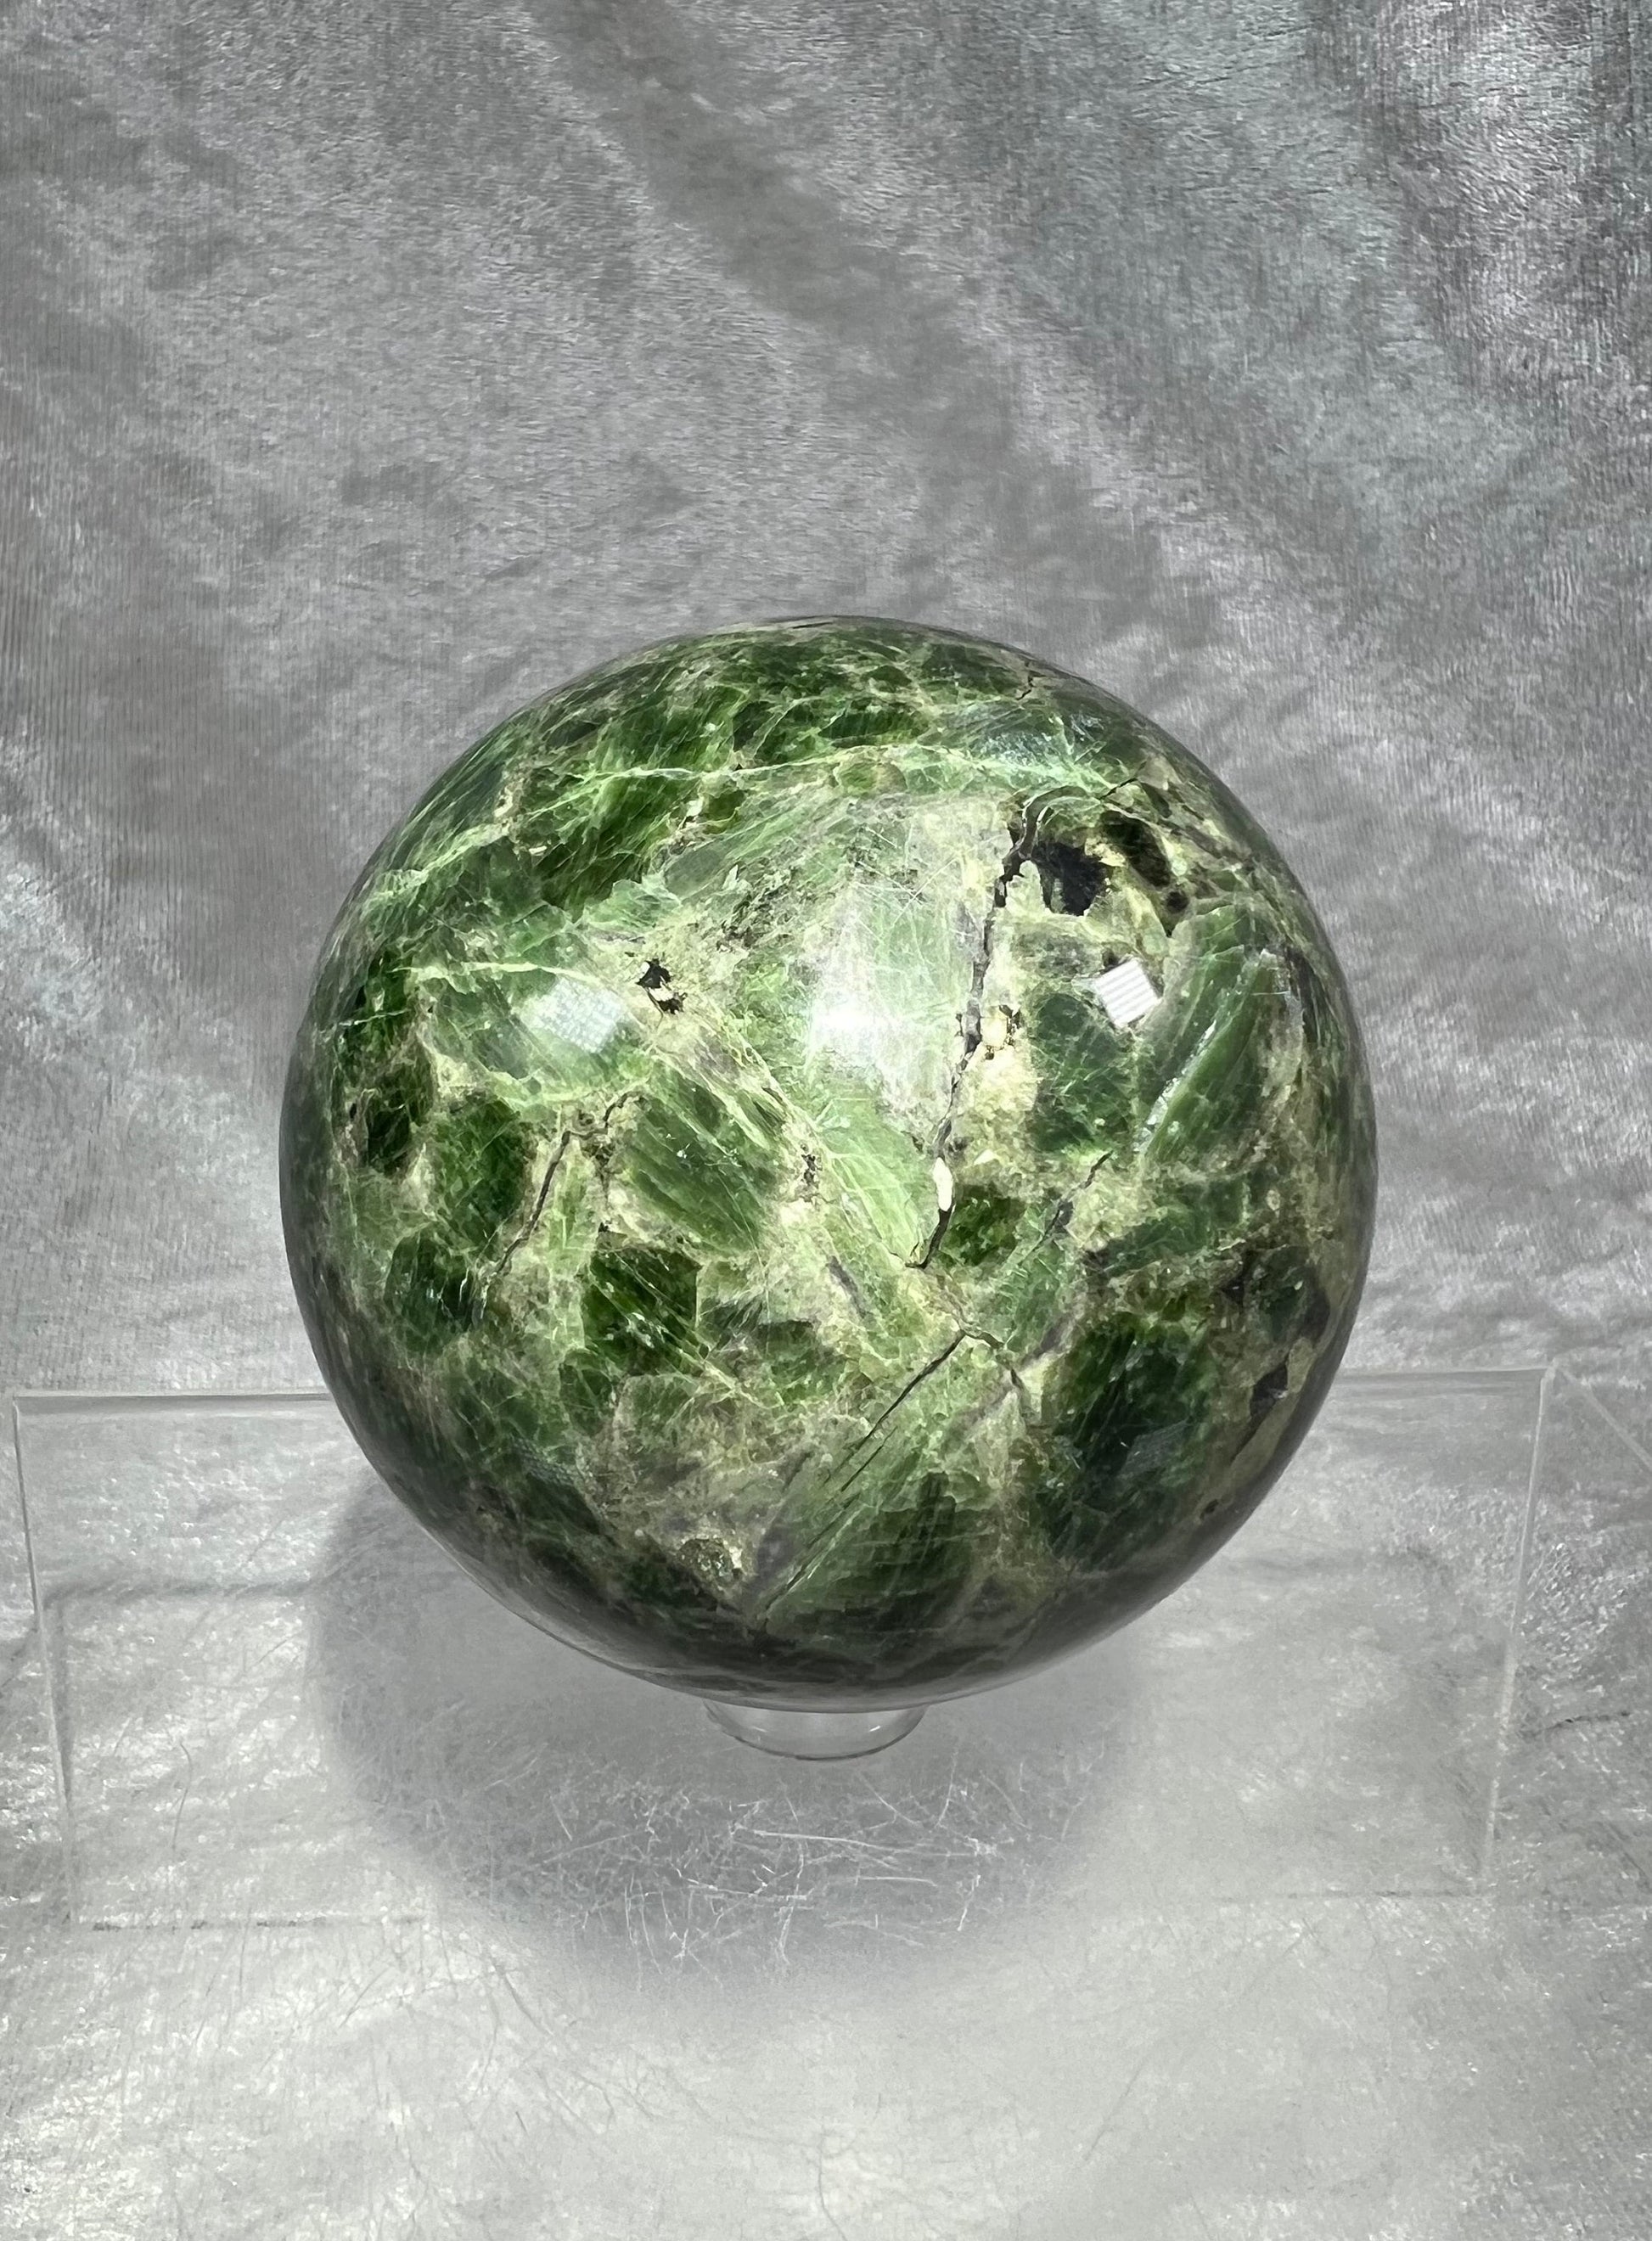 Incredible Diopside Crystal Sphere. 70mm. Very Rare And High Quality Sphere. Loaded With Tons Of Flash!